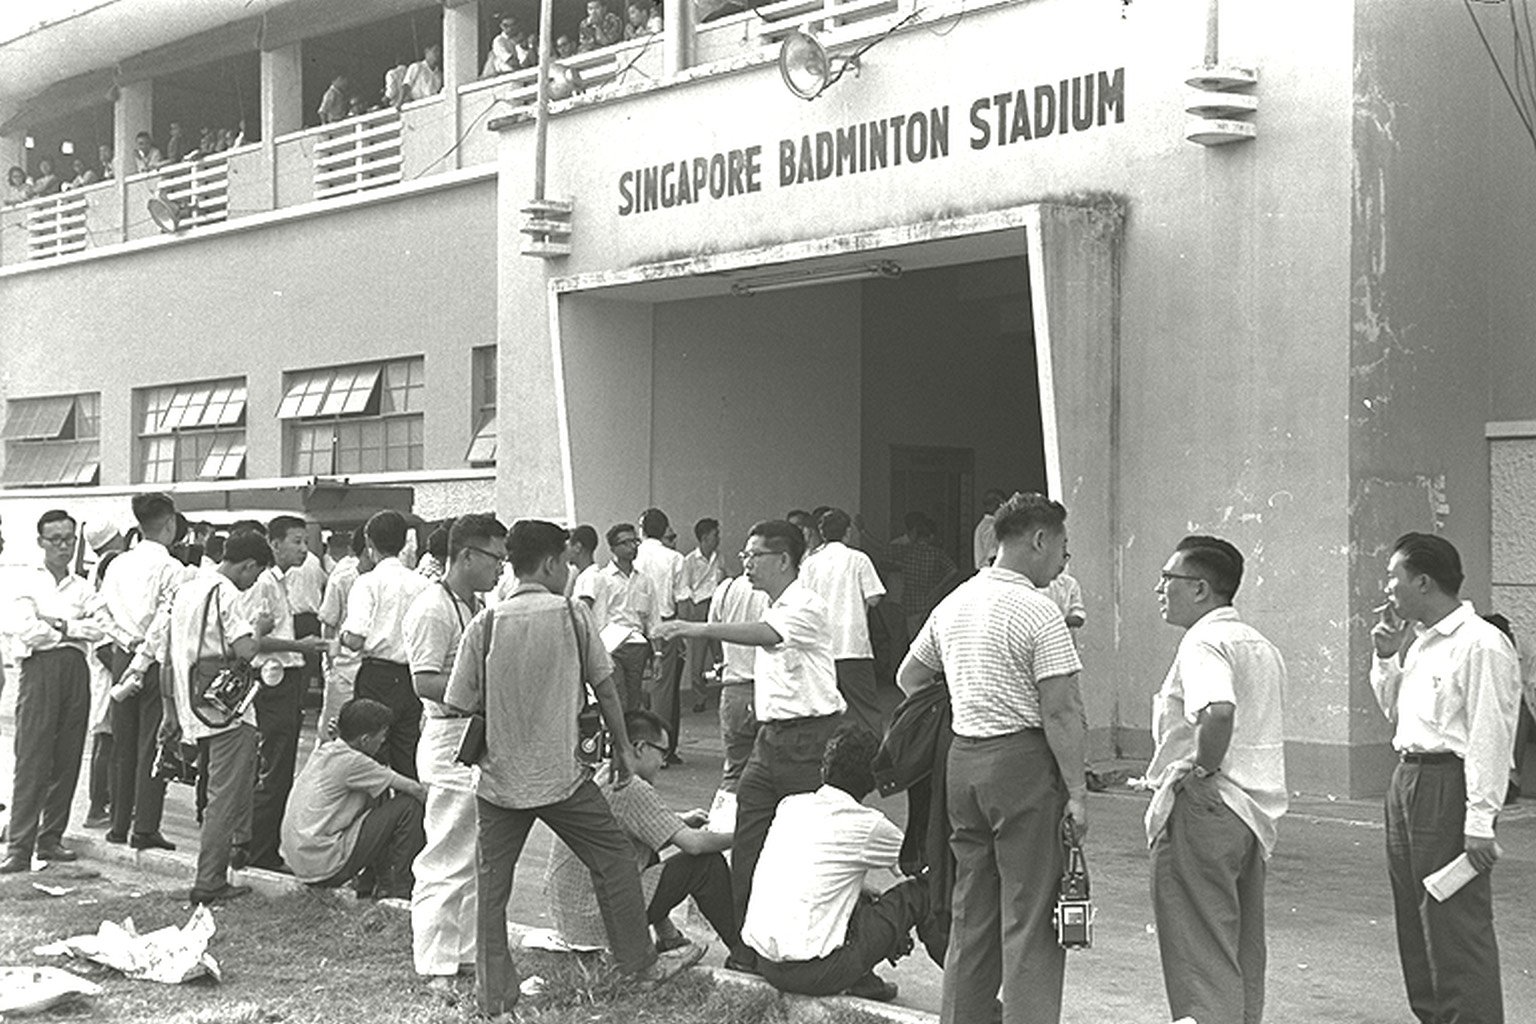 An exterior view from 1962, when the former Singapore Badminton Hall served as a vote counting station for the referendum for the merger of Singapore and Malaysia.